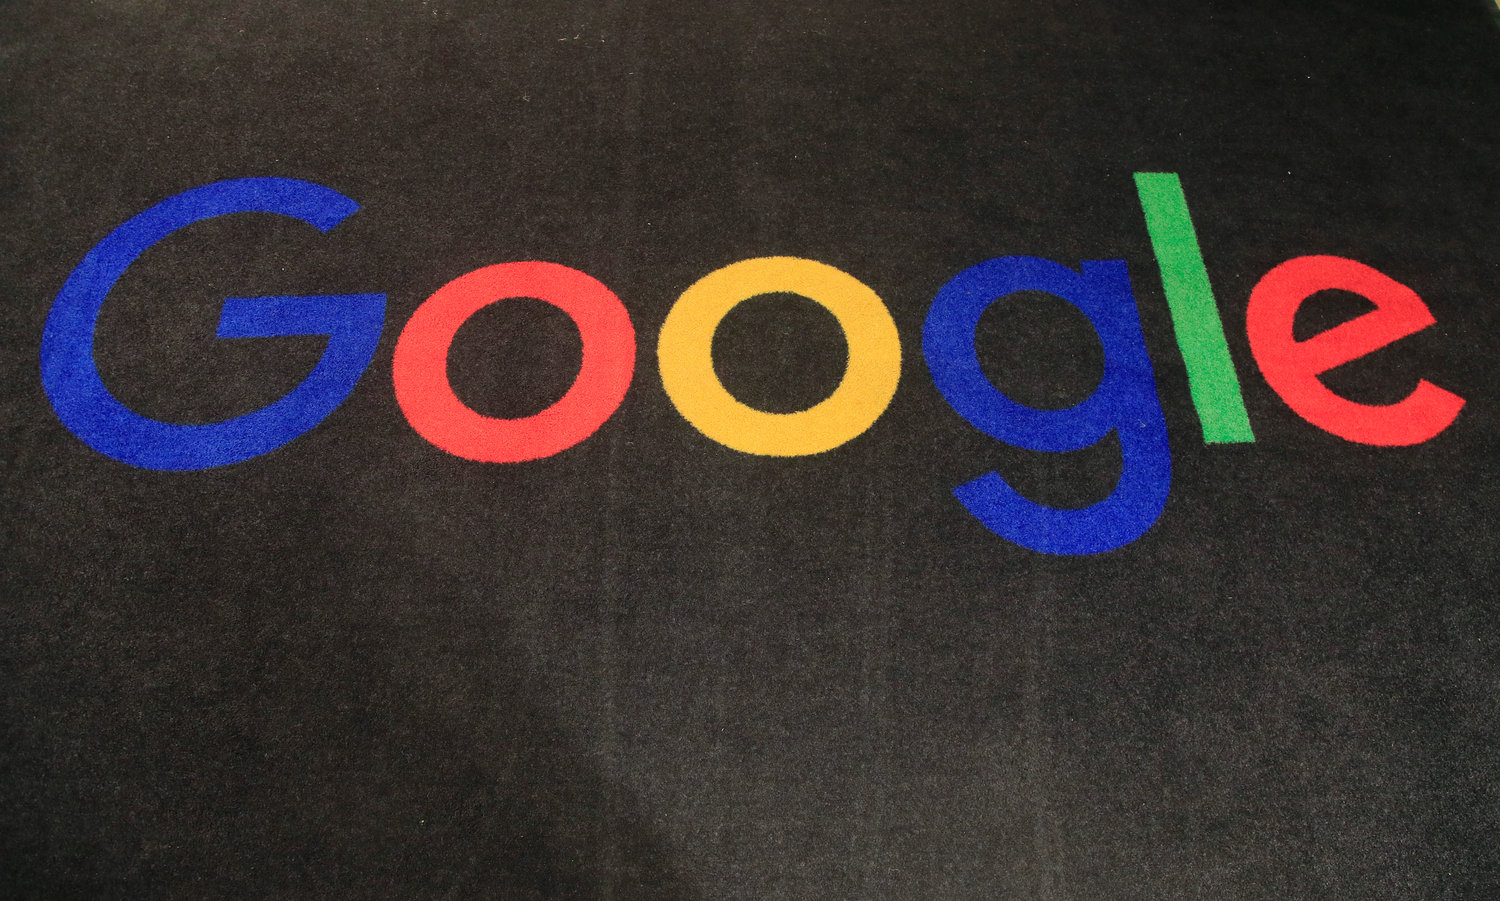 The logo of Google is displayed on a carpet at the entrance hall of Google France in Paris, on Nov. 18, 2019. Google said Friday, jan. 20, 2023, it’s laying off 12,000 workers, becoming the latest tech company to trim staff after rapid expansions during the COVID-19 pandemic have worn off.